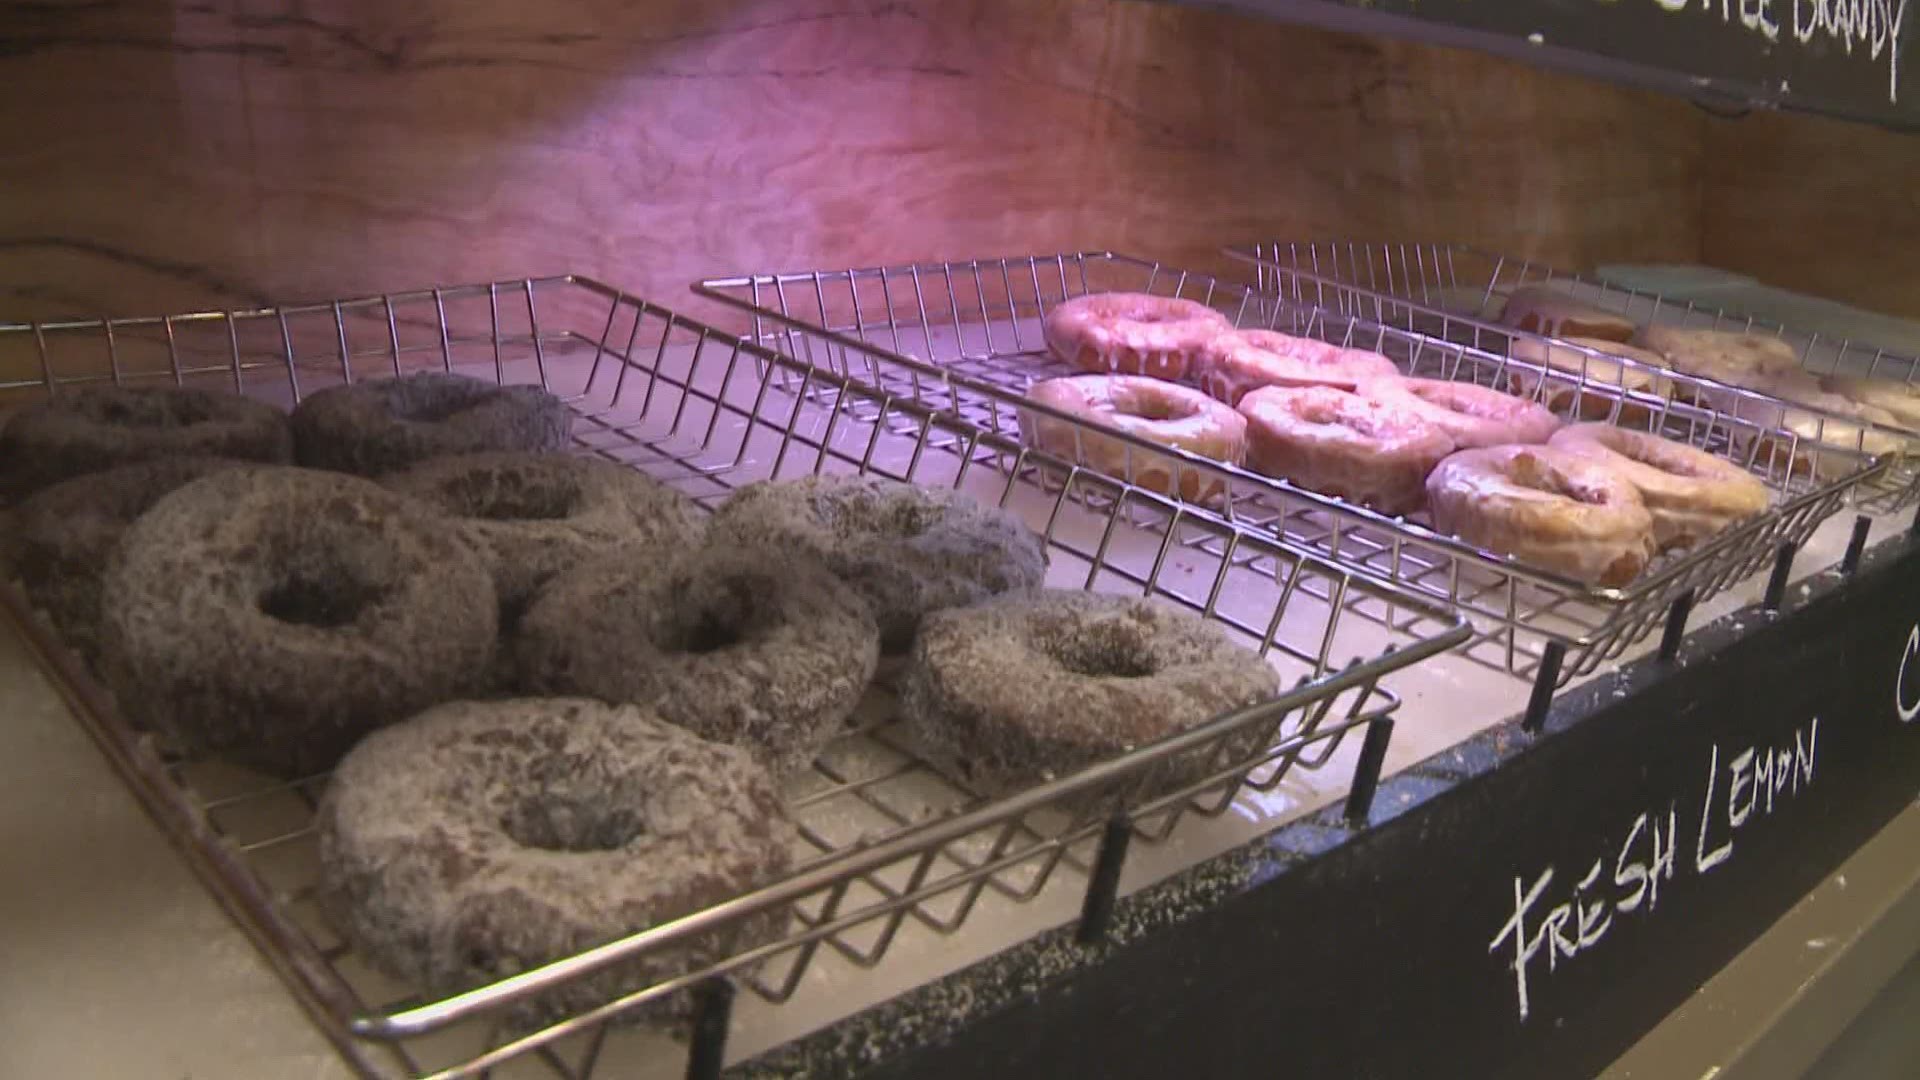 The Holy Donut has announced that their shop on Exchange Street in Portland will be shut down.